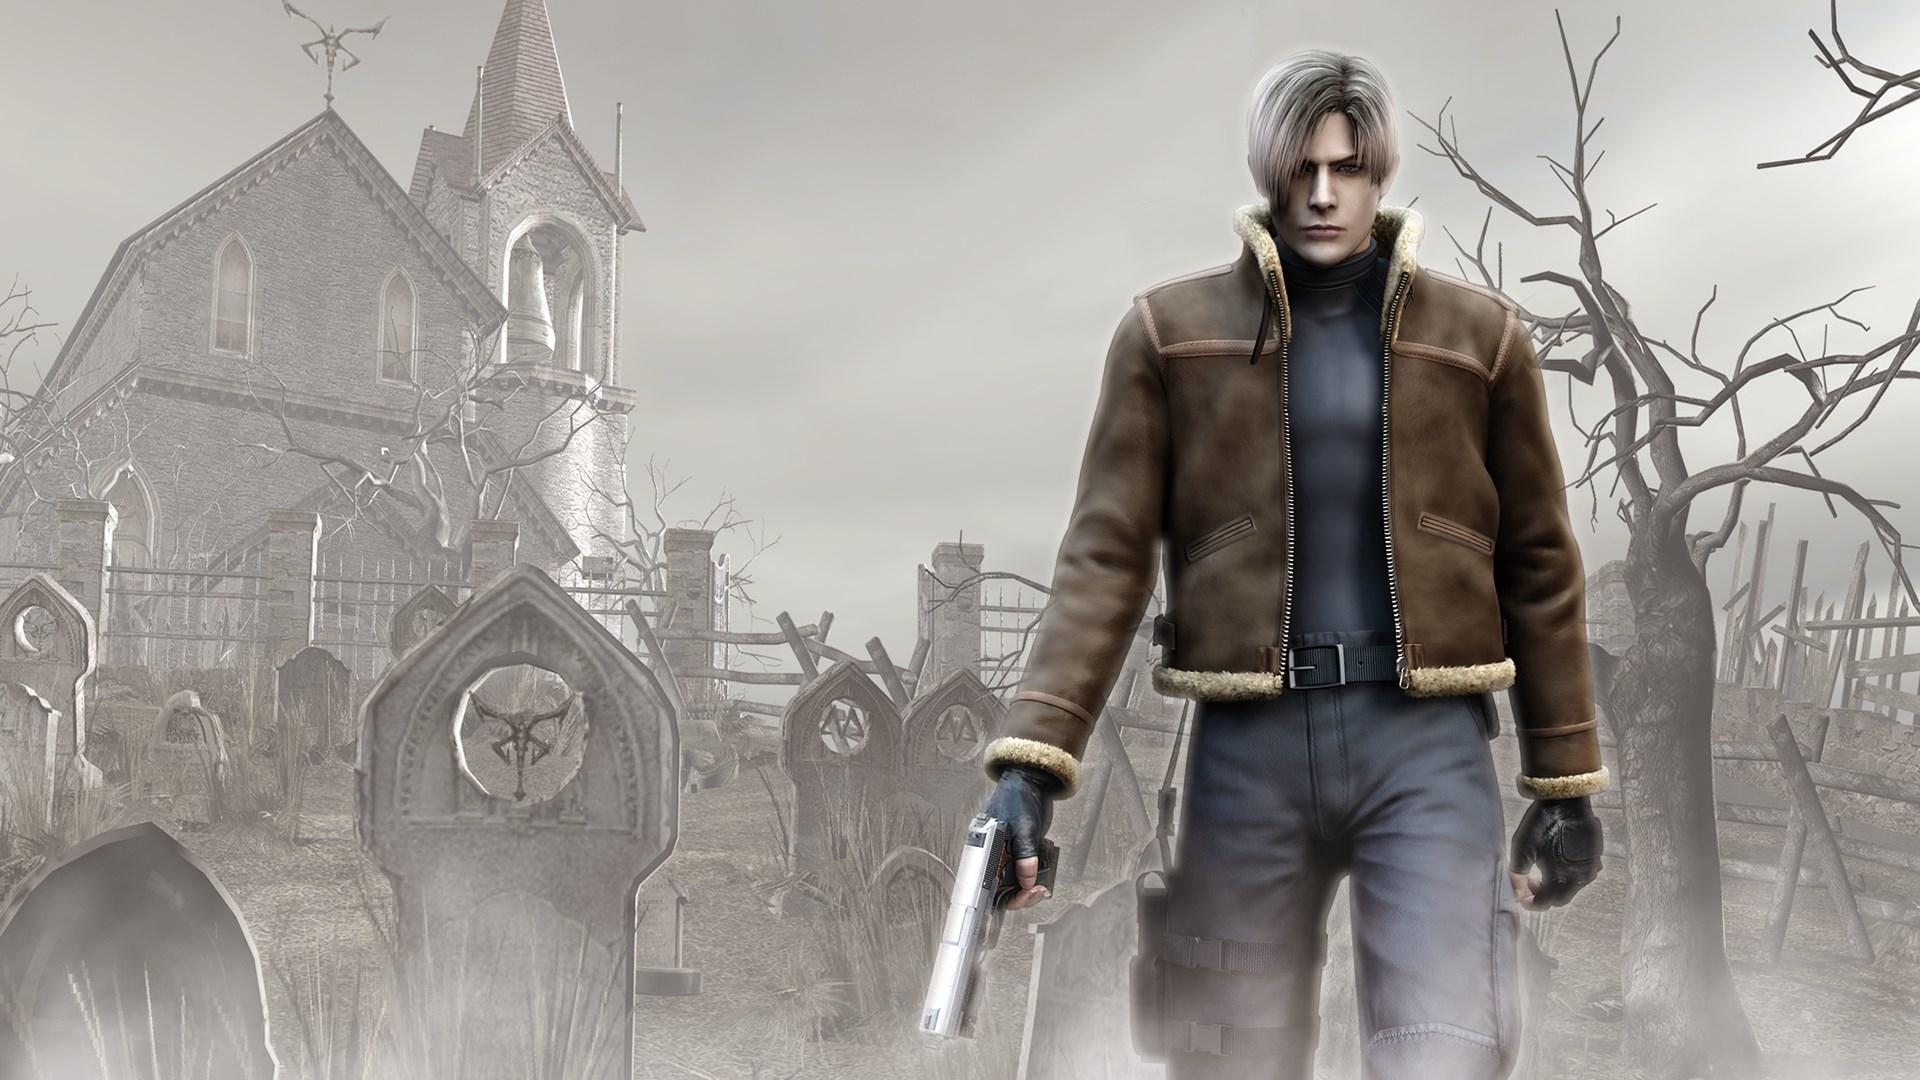 Resident Evil 4 Leon S. Kennedy 1440P Resolution Wallpaper, HD Games 4K Wallpaper, Image, Photo and Background